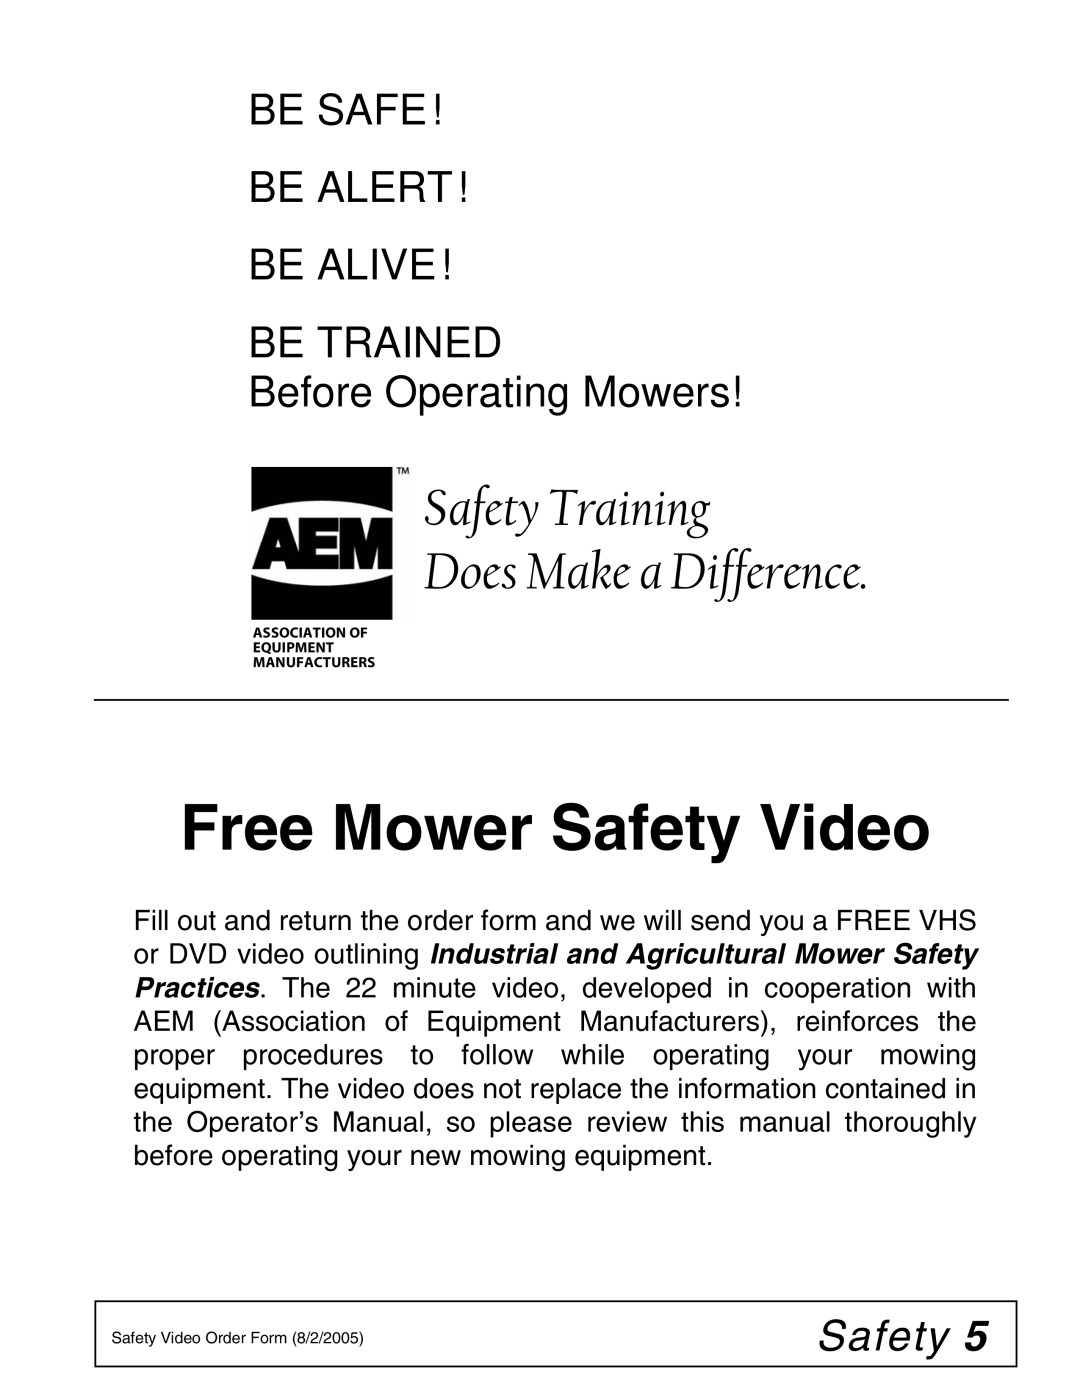 Woods Equipment TS1680Q manual Free Mower Safety Video 